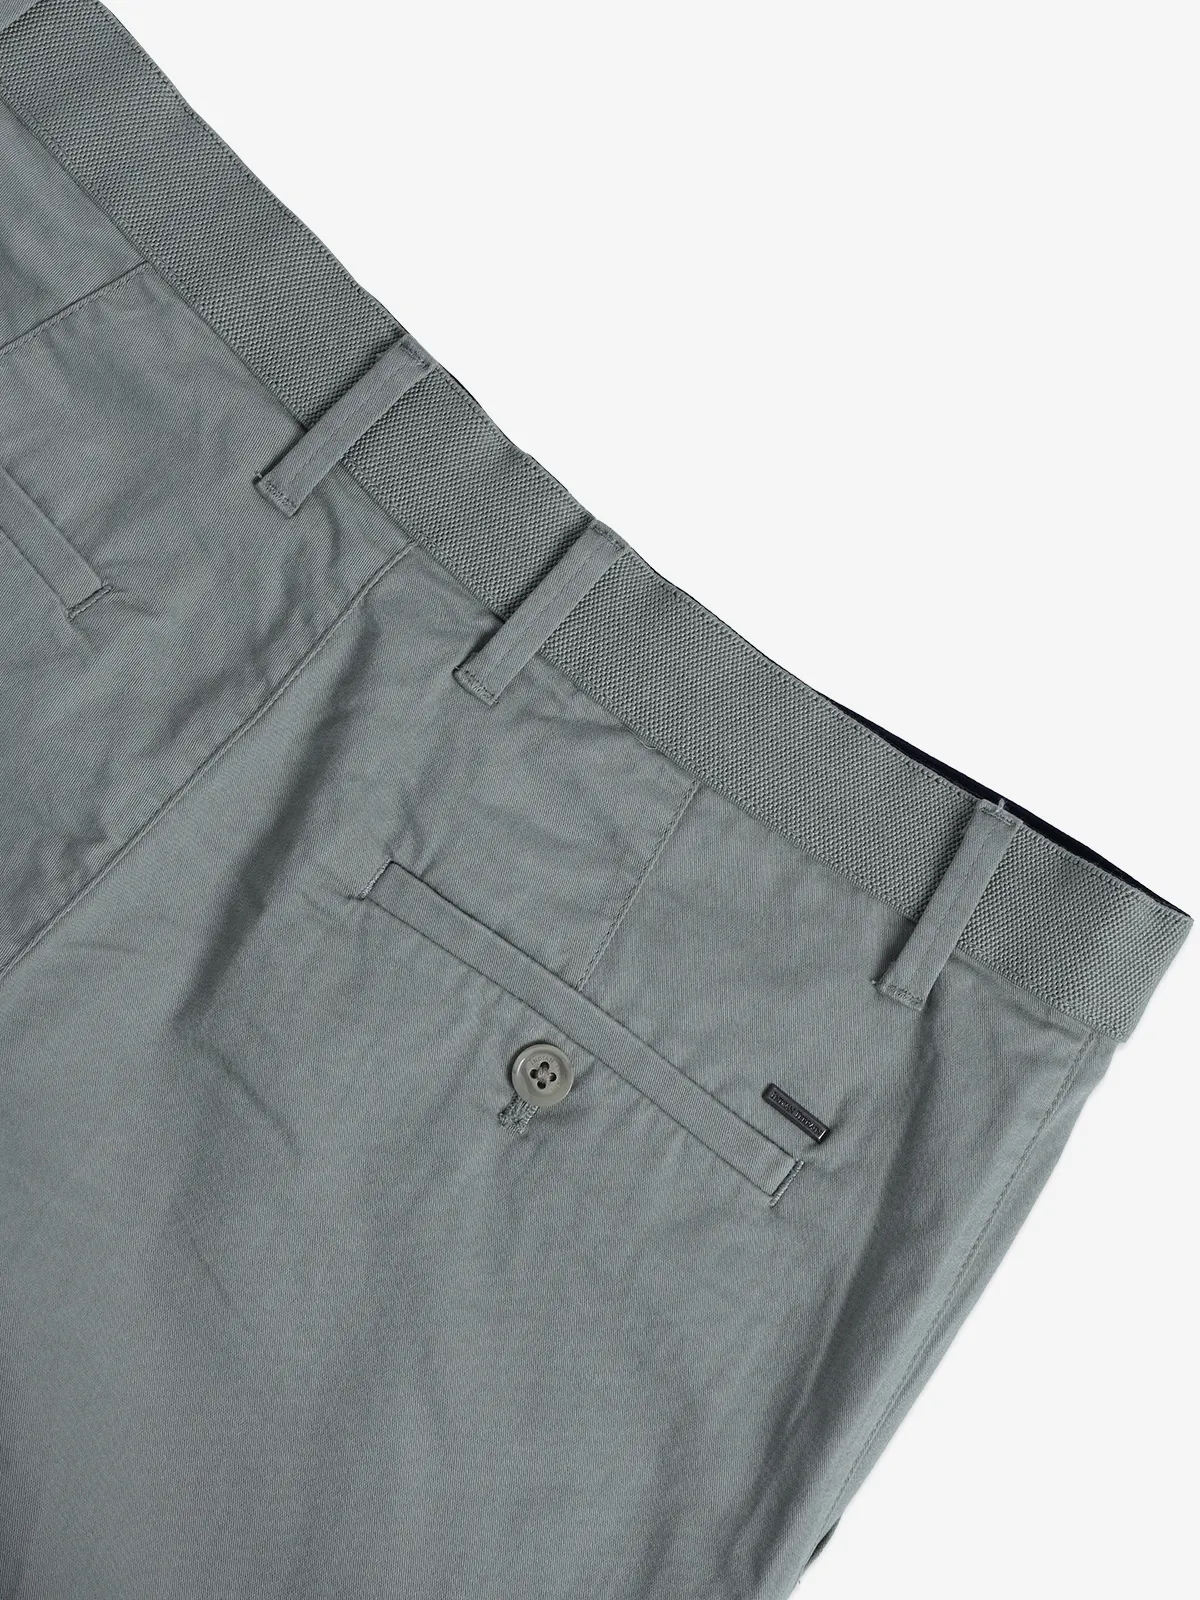 INDIAN TERRAIN olive solid slim fit shorts